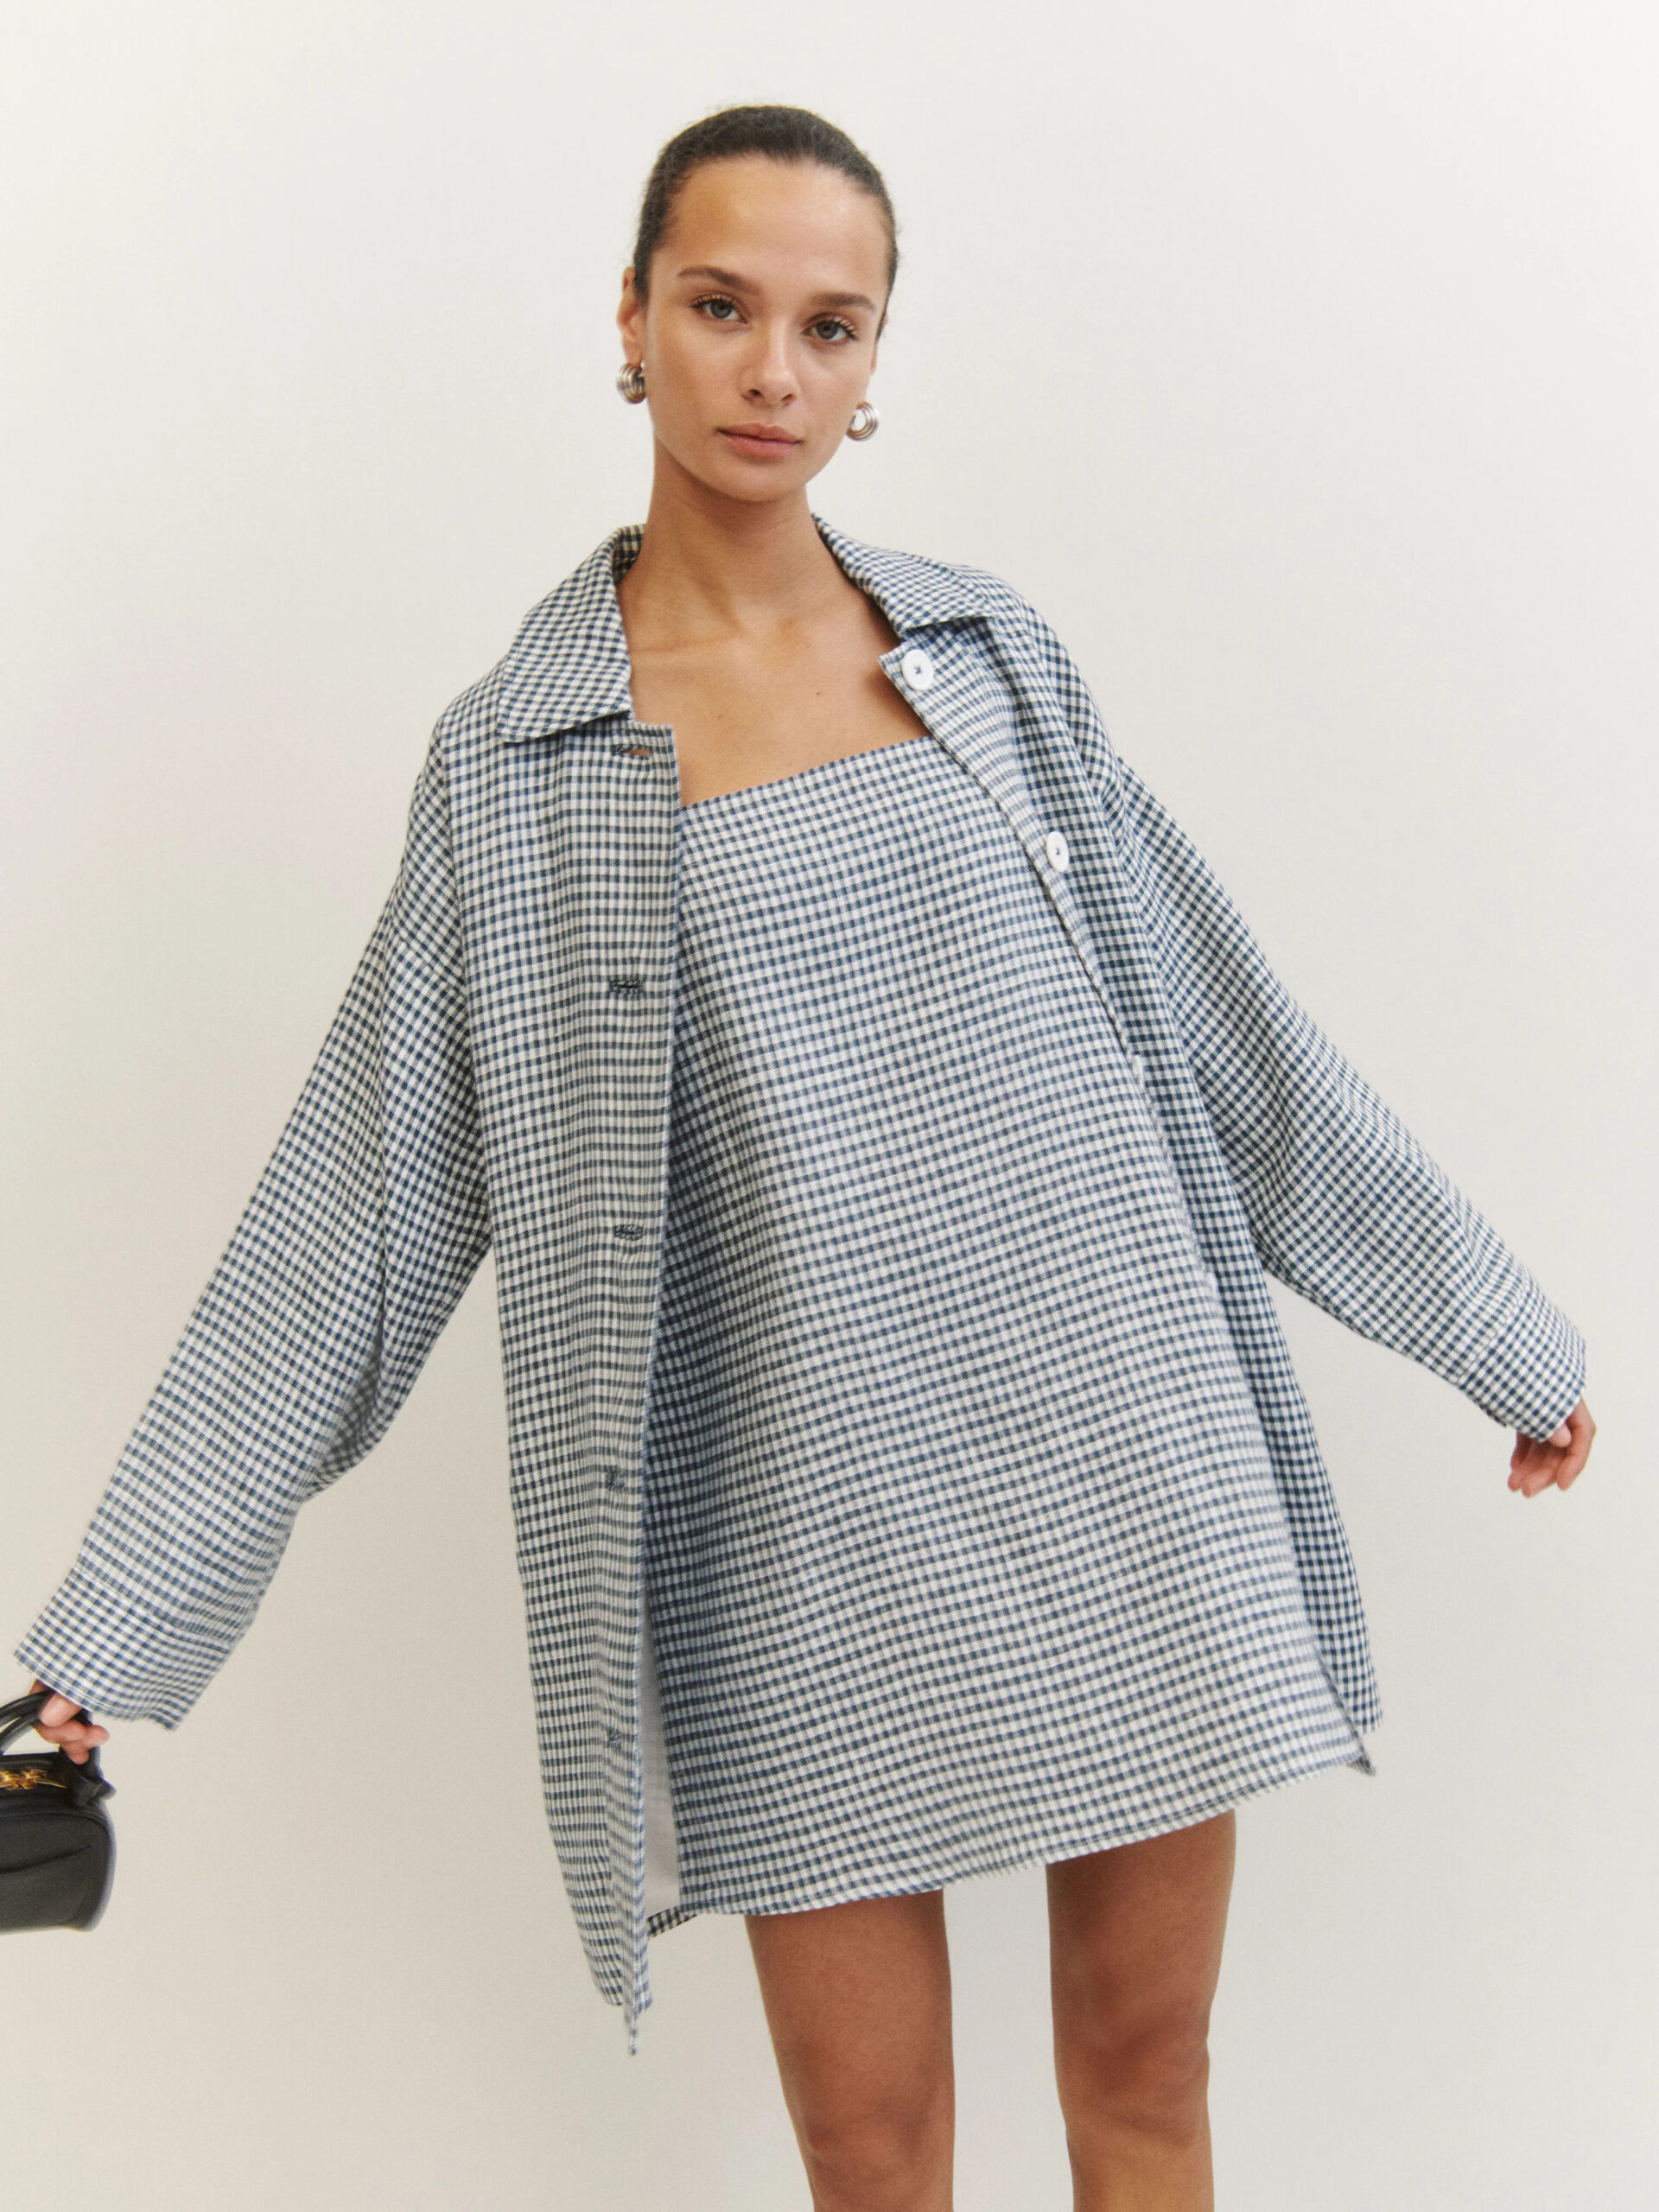 The model is wearing a blue and white checkered shirt dress.